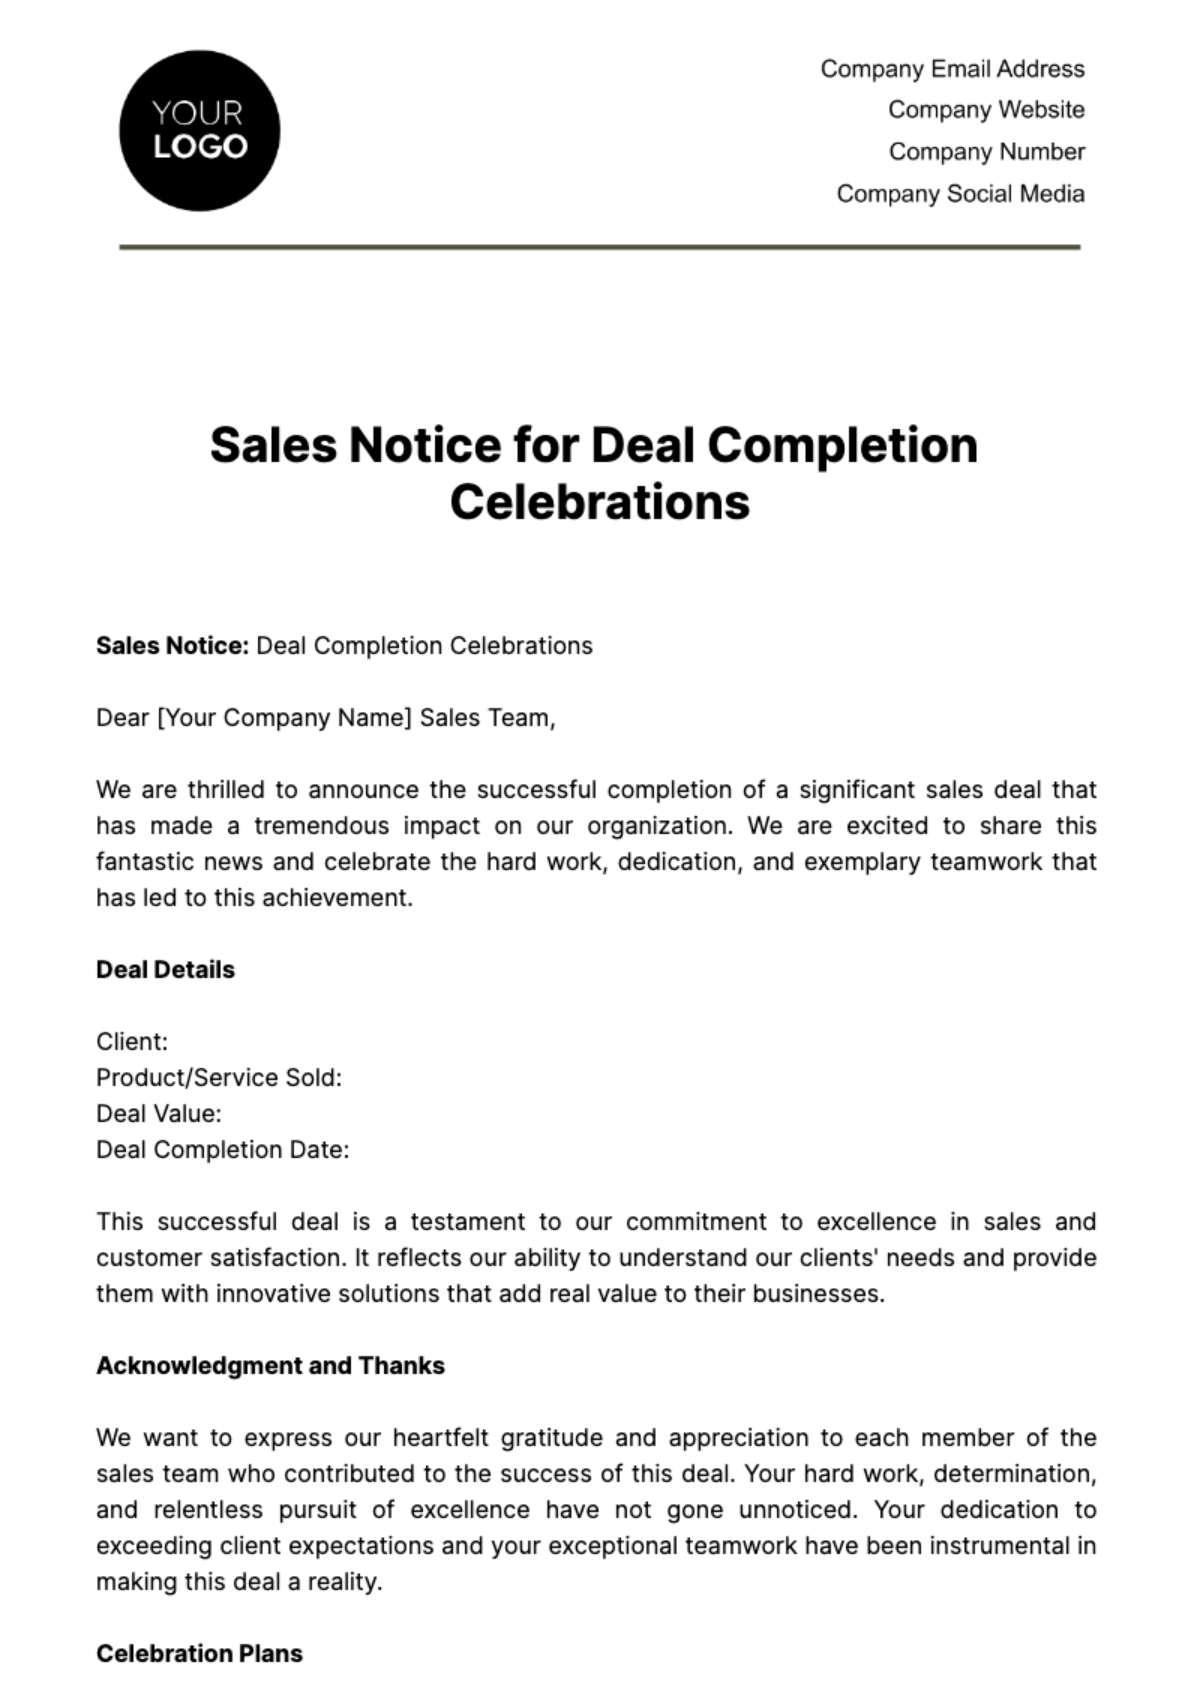 Sales Notice for Deal Completion Celebrations Template